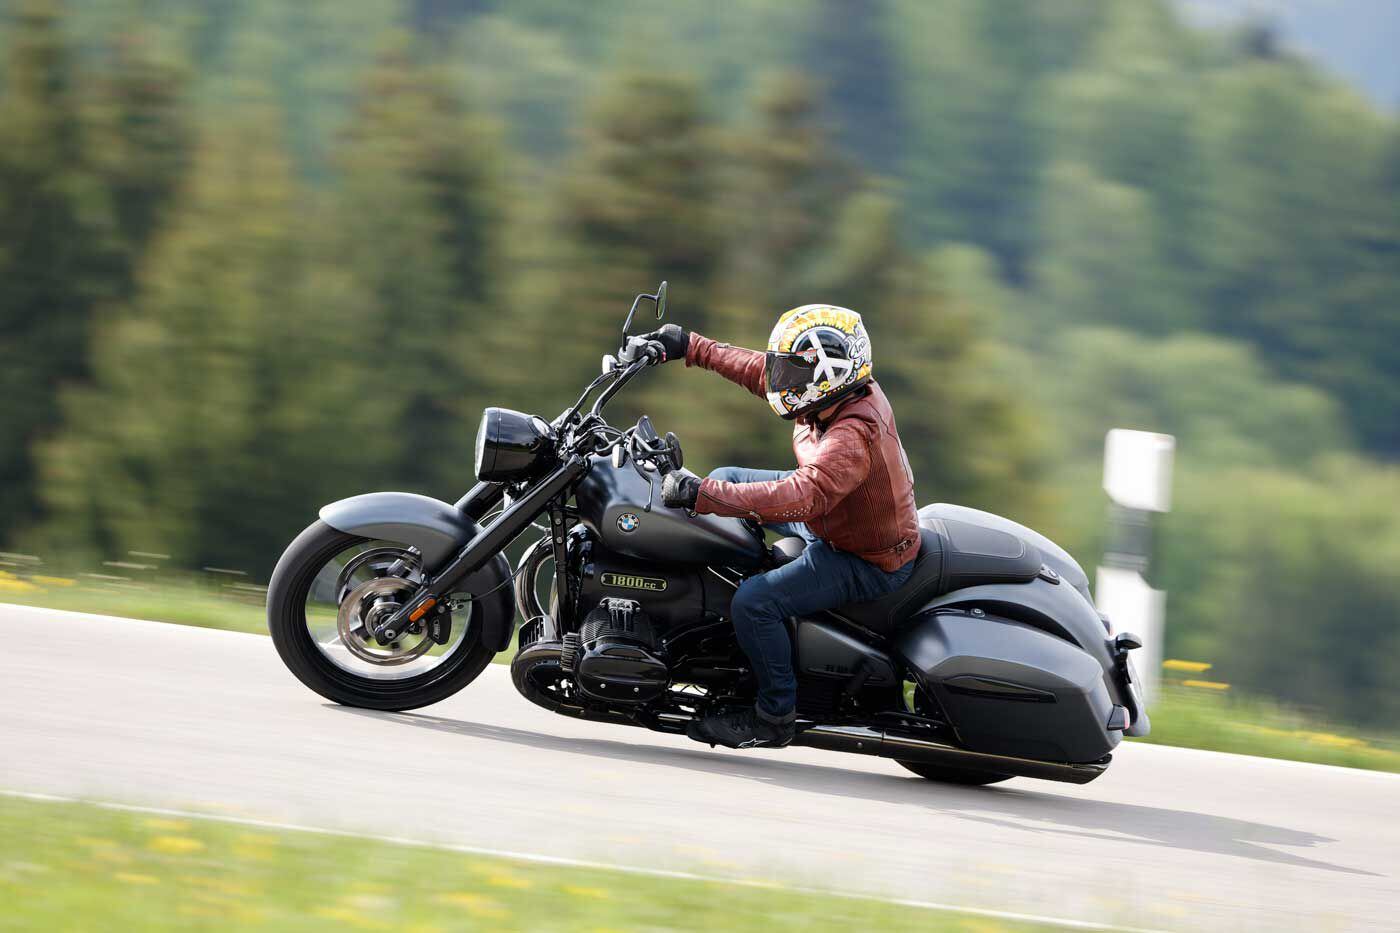 Although it tips the scales at 825 pounds, the Roctane handles curving roads well as a hot-rod cruiser.